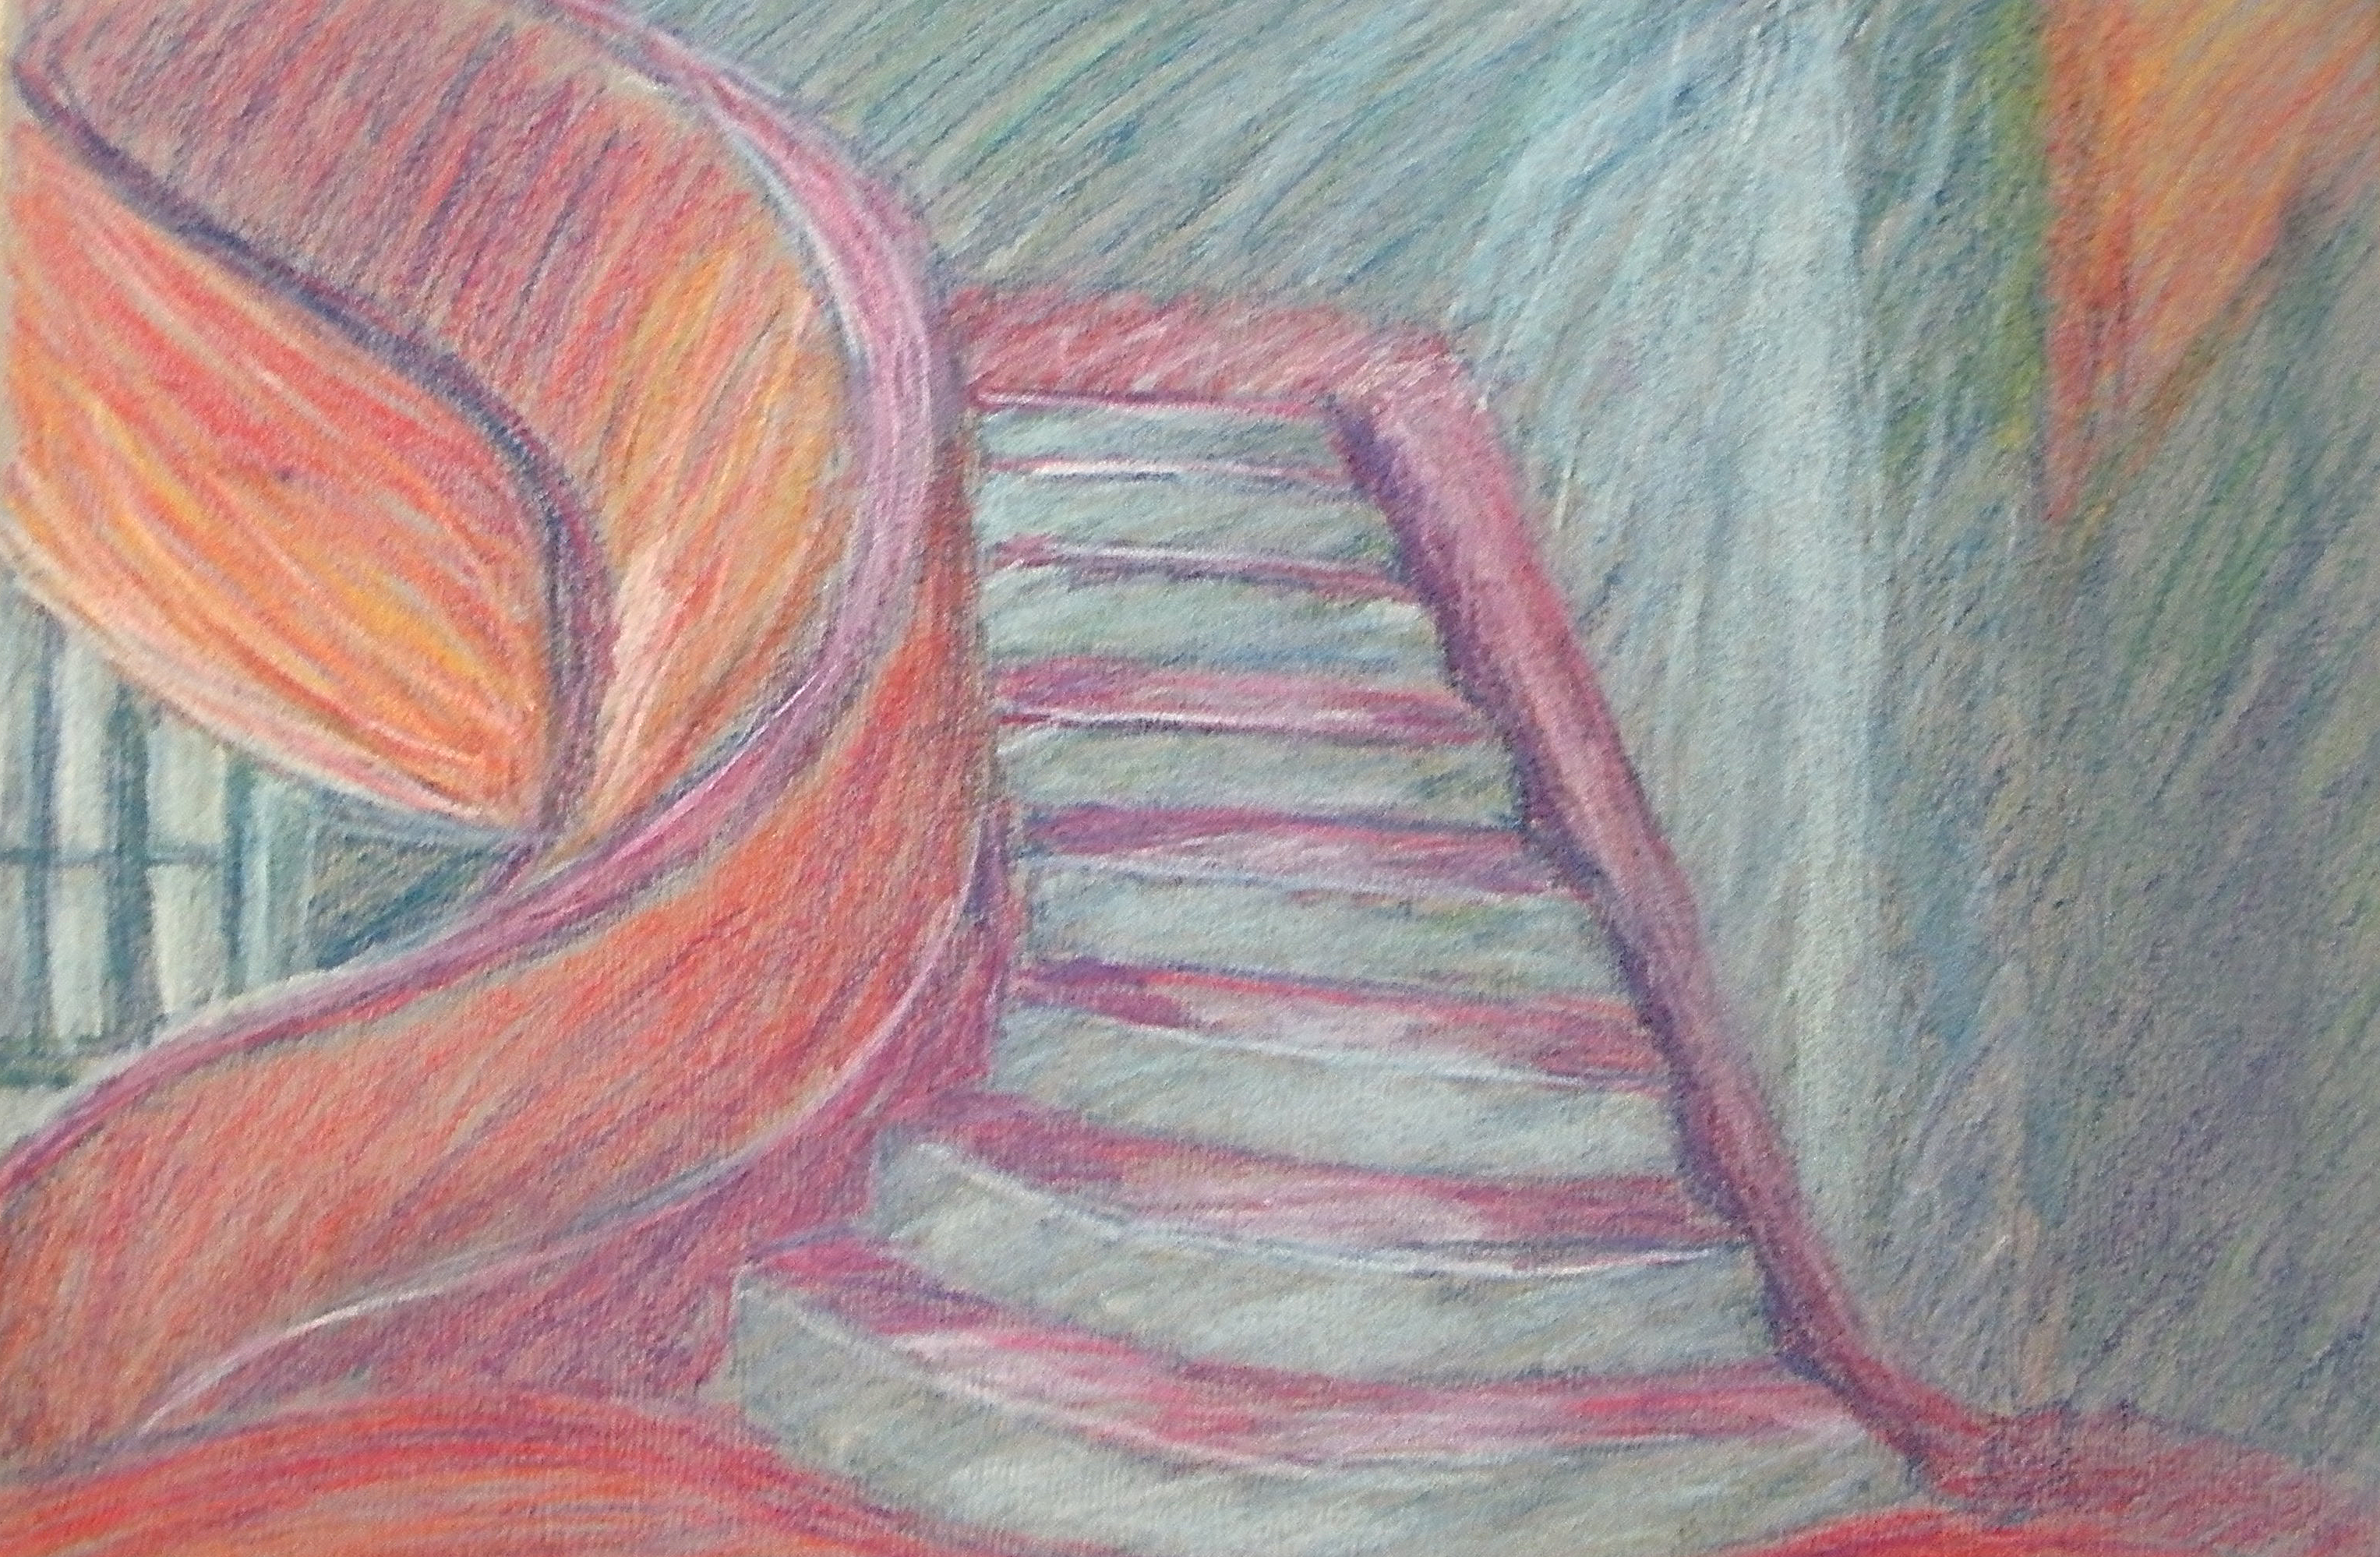 Complementary Contrast Drawing: CMU Baker Hall Stairs II